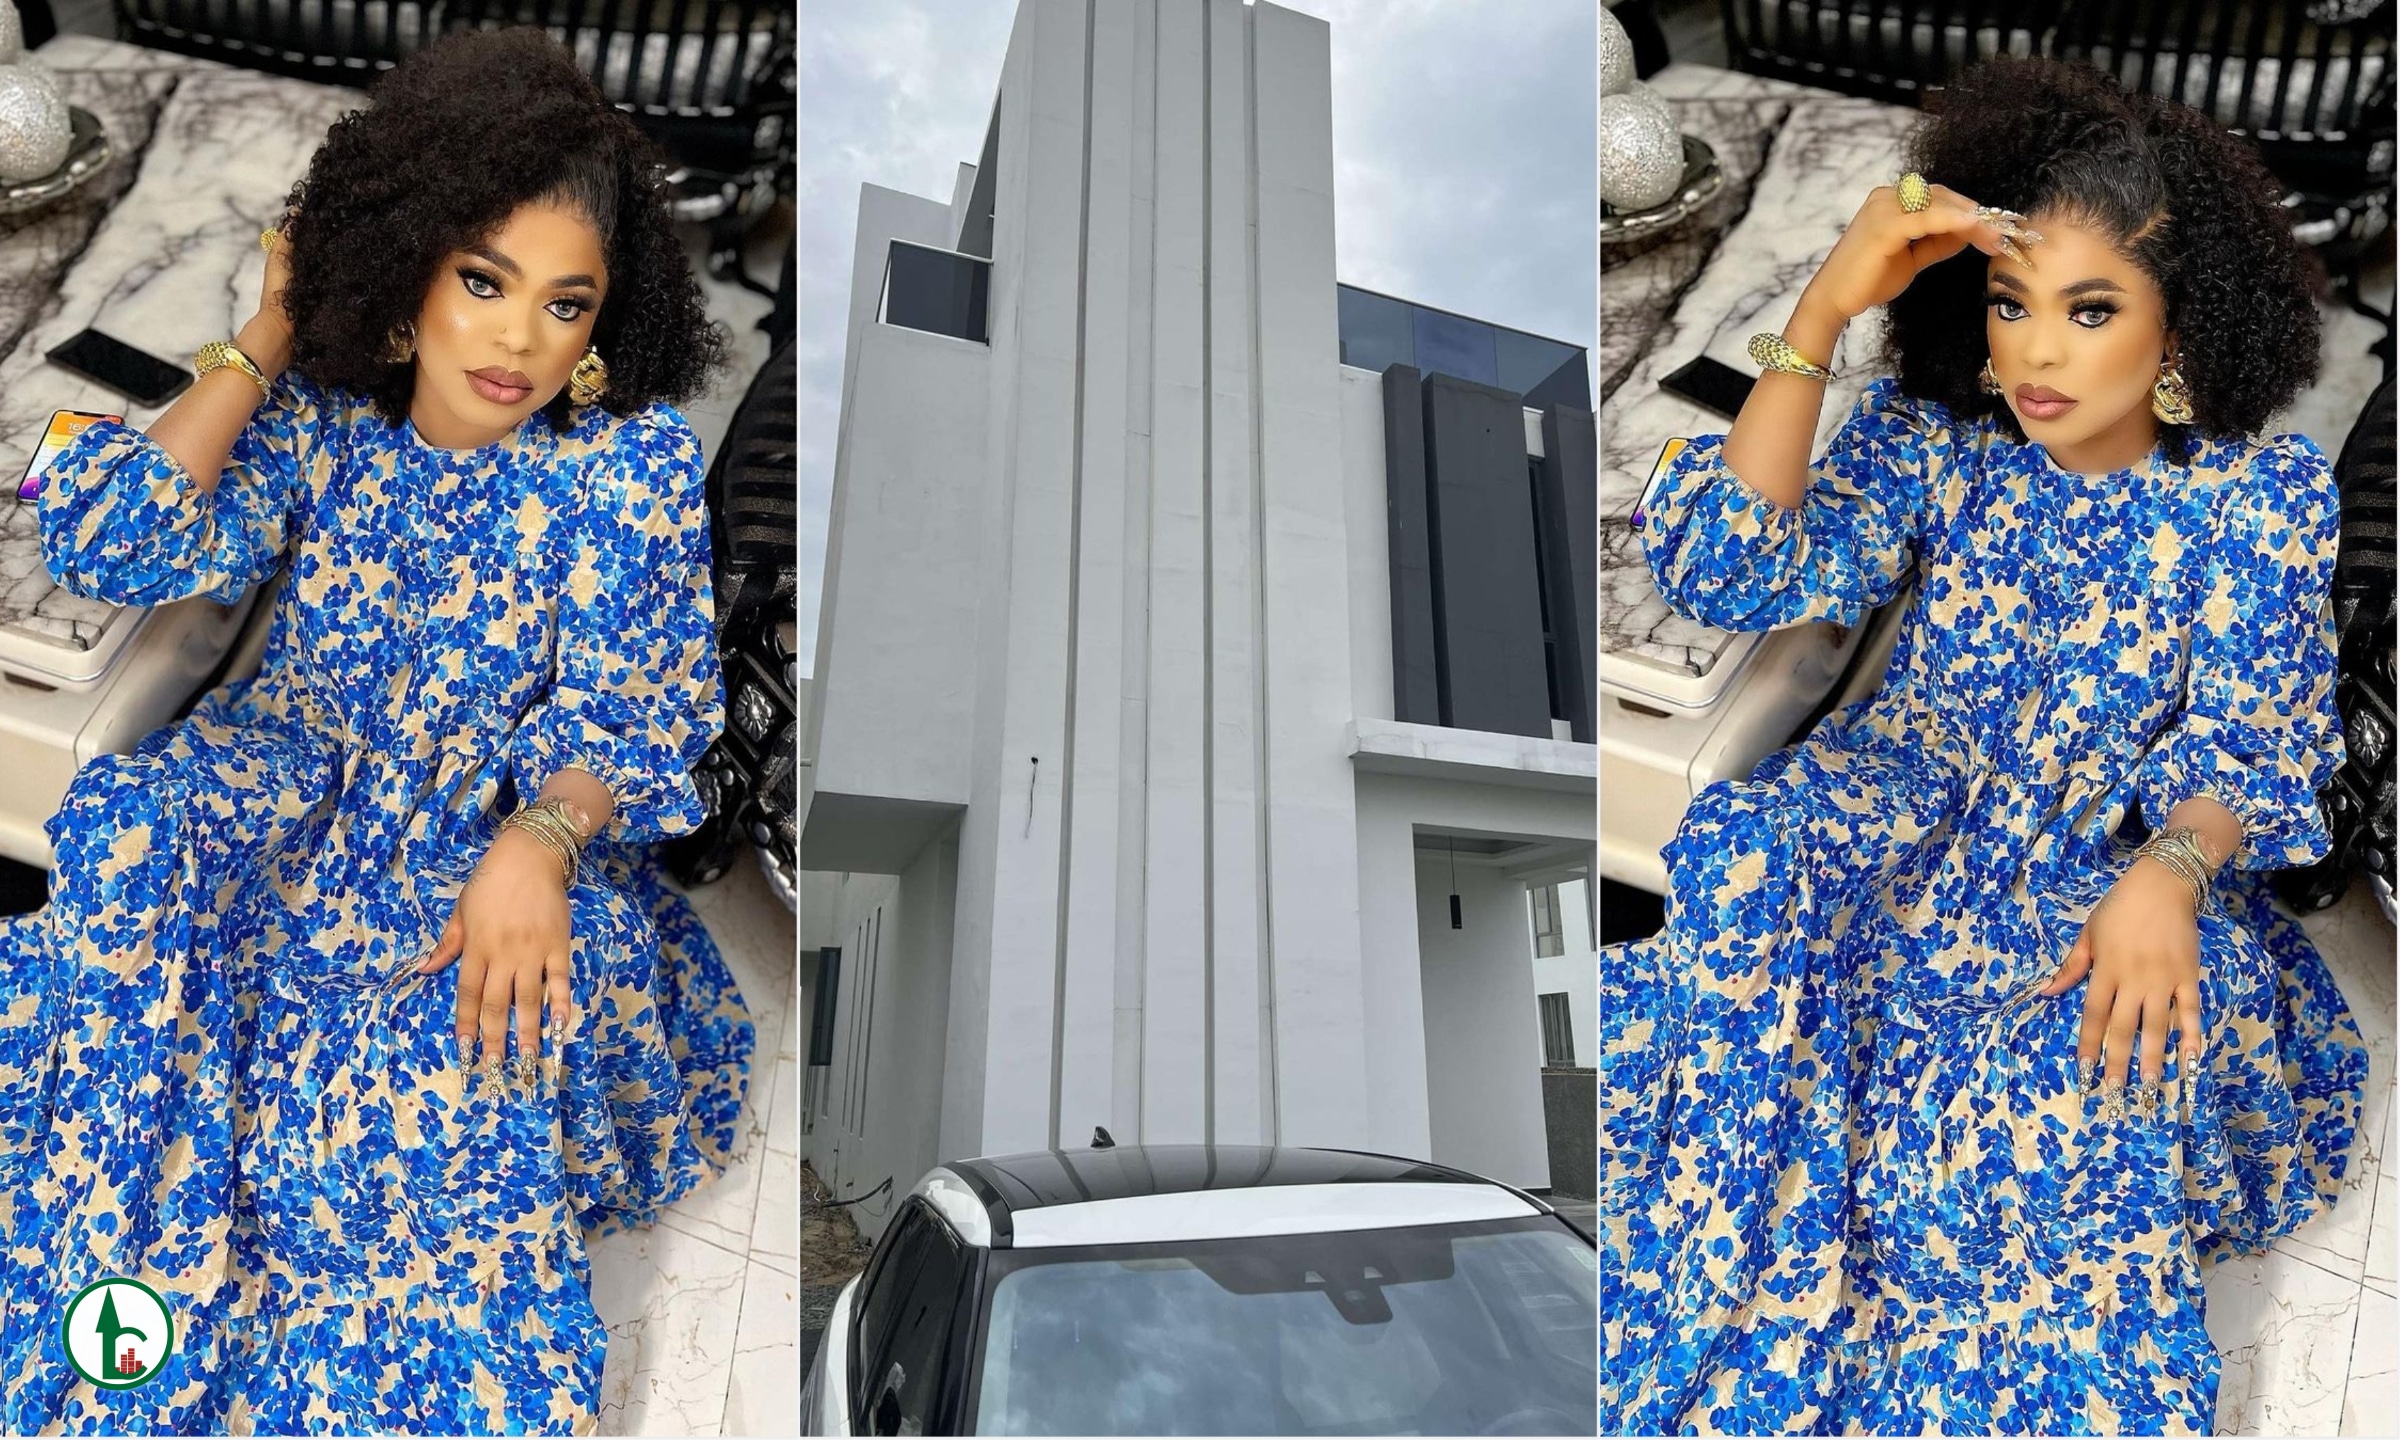 “A home of 400 million in one of the best locations” – Cross-dresser Bobrisky brags as he finally unveils his multi-million naira mansion in Lagos